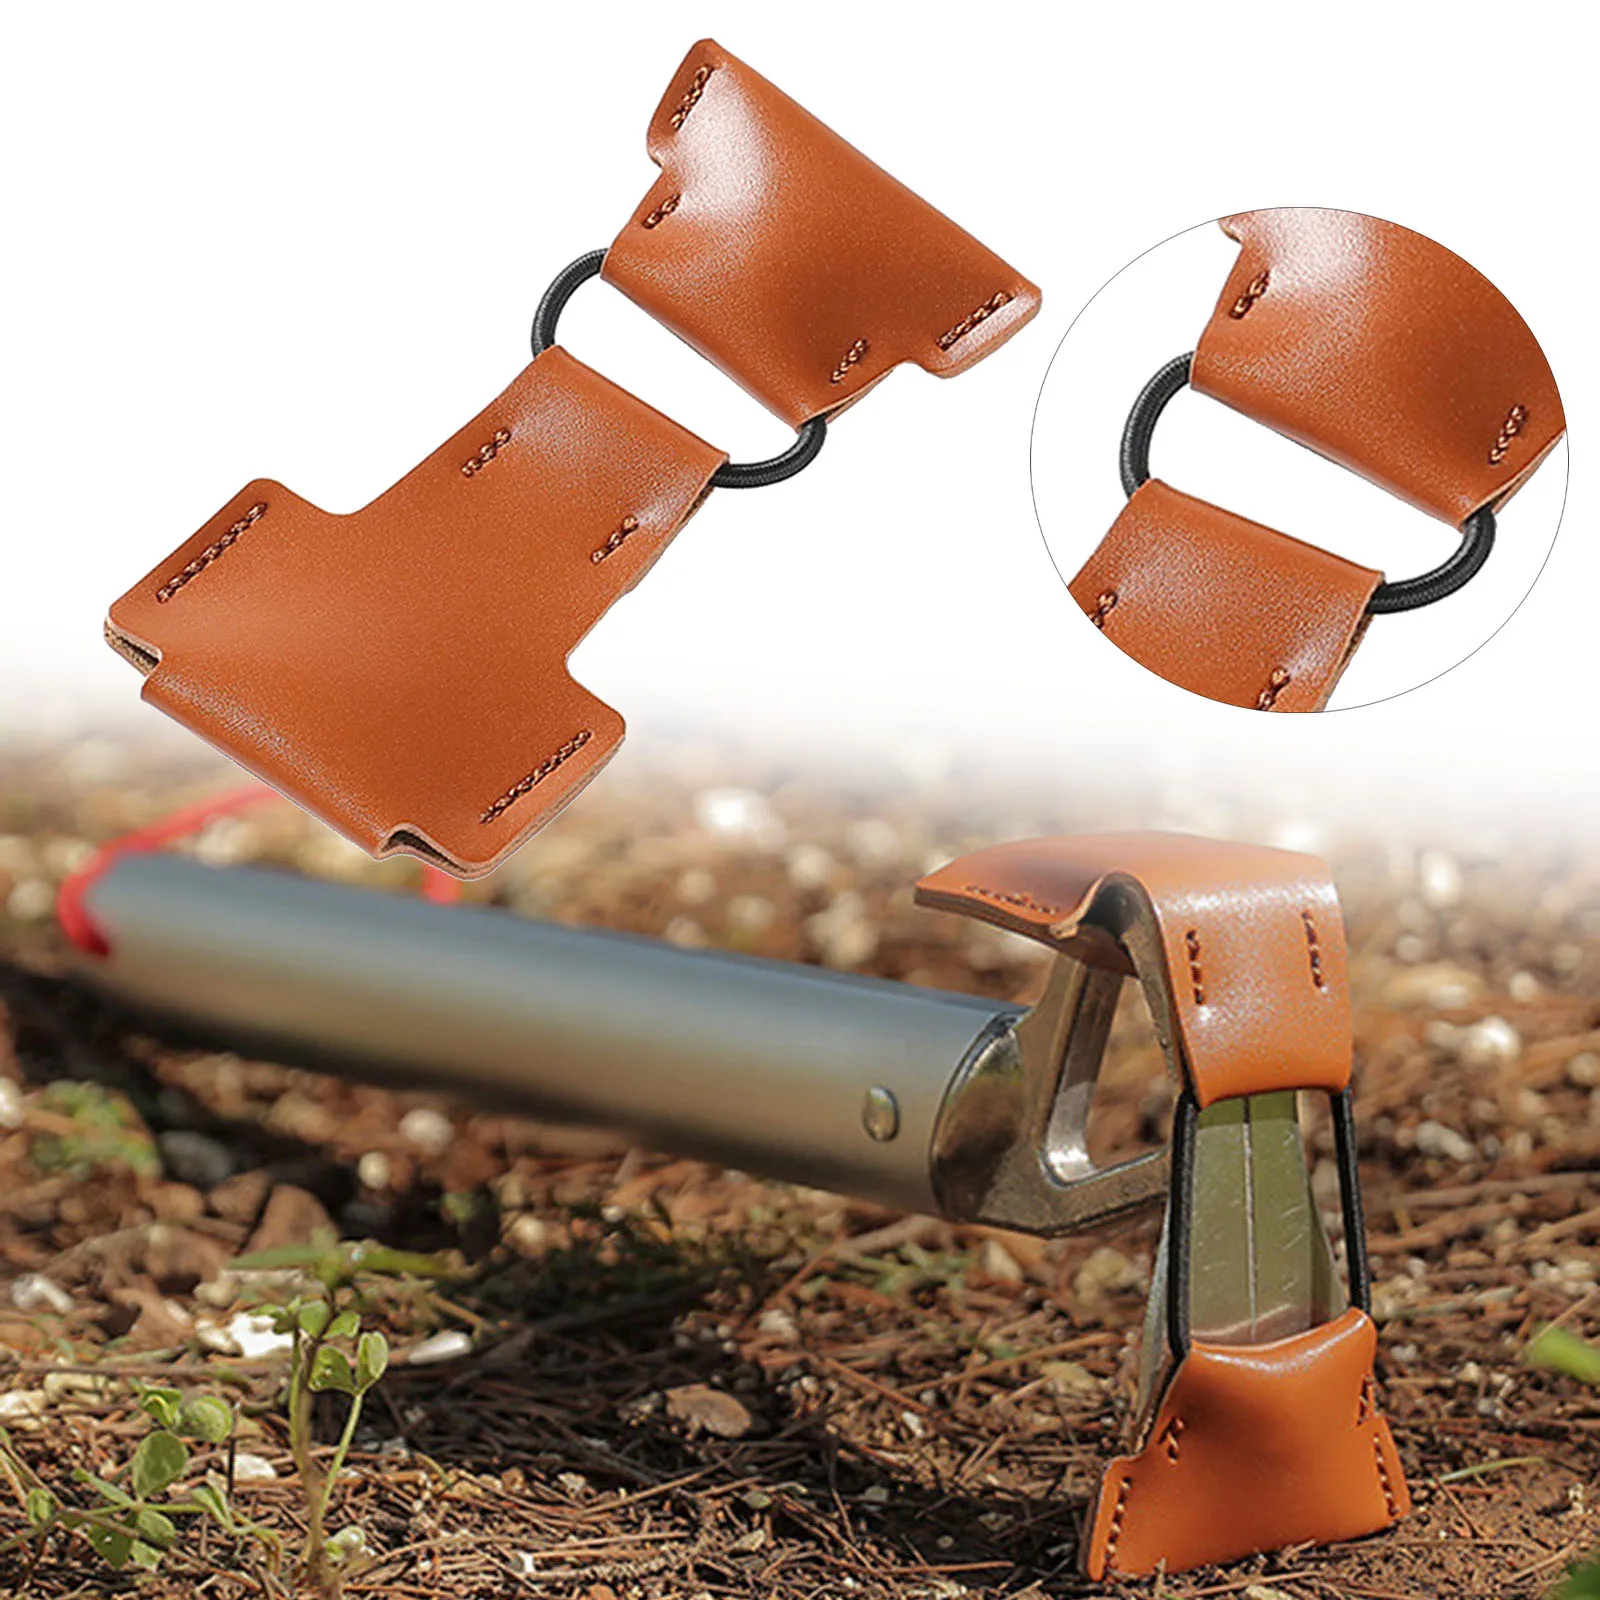 Cover For Hammer Sheath Multifuntional Soft Survival Portable Hunting Leather Hiking Outdoor Camping Hatchet Blade Protection